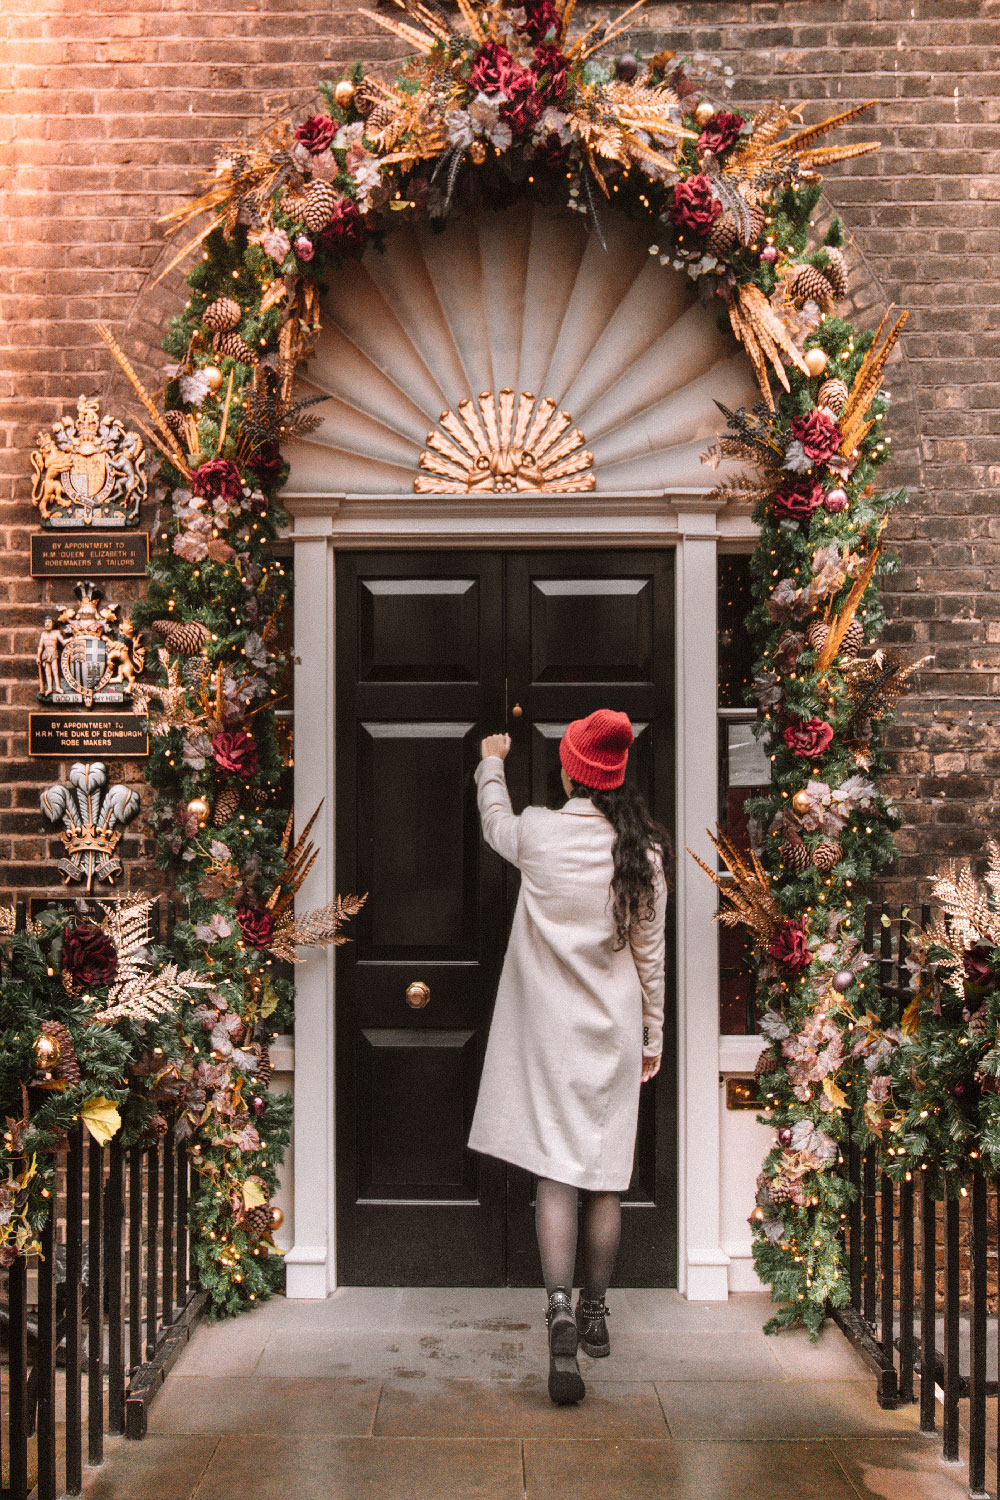 25 Instagrammable Christmas Spots in London - The Travelling Frenchy